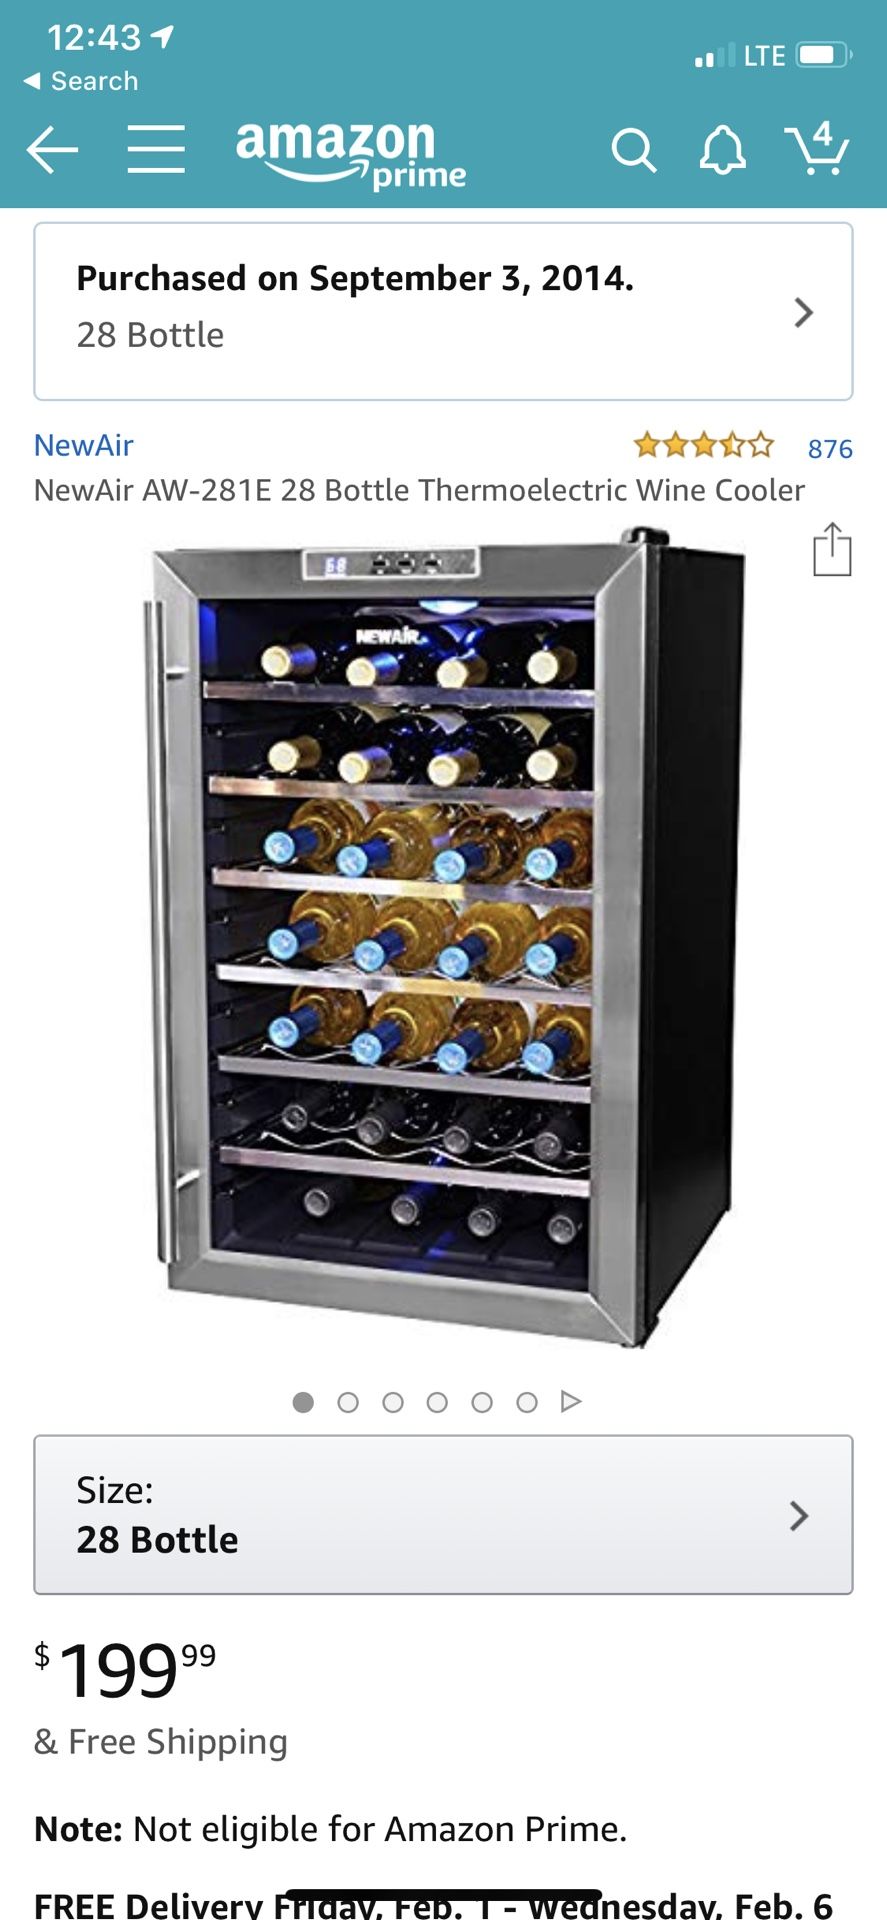 NewAir Thermoelectric Wine Cooler - 28 bottle